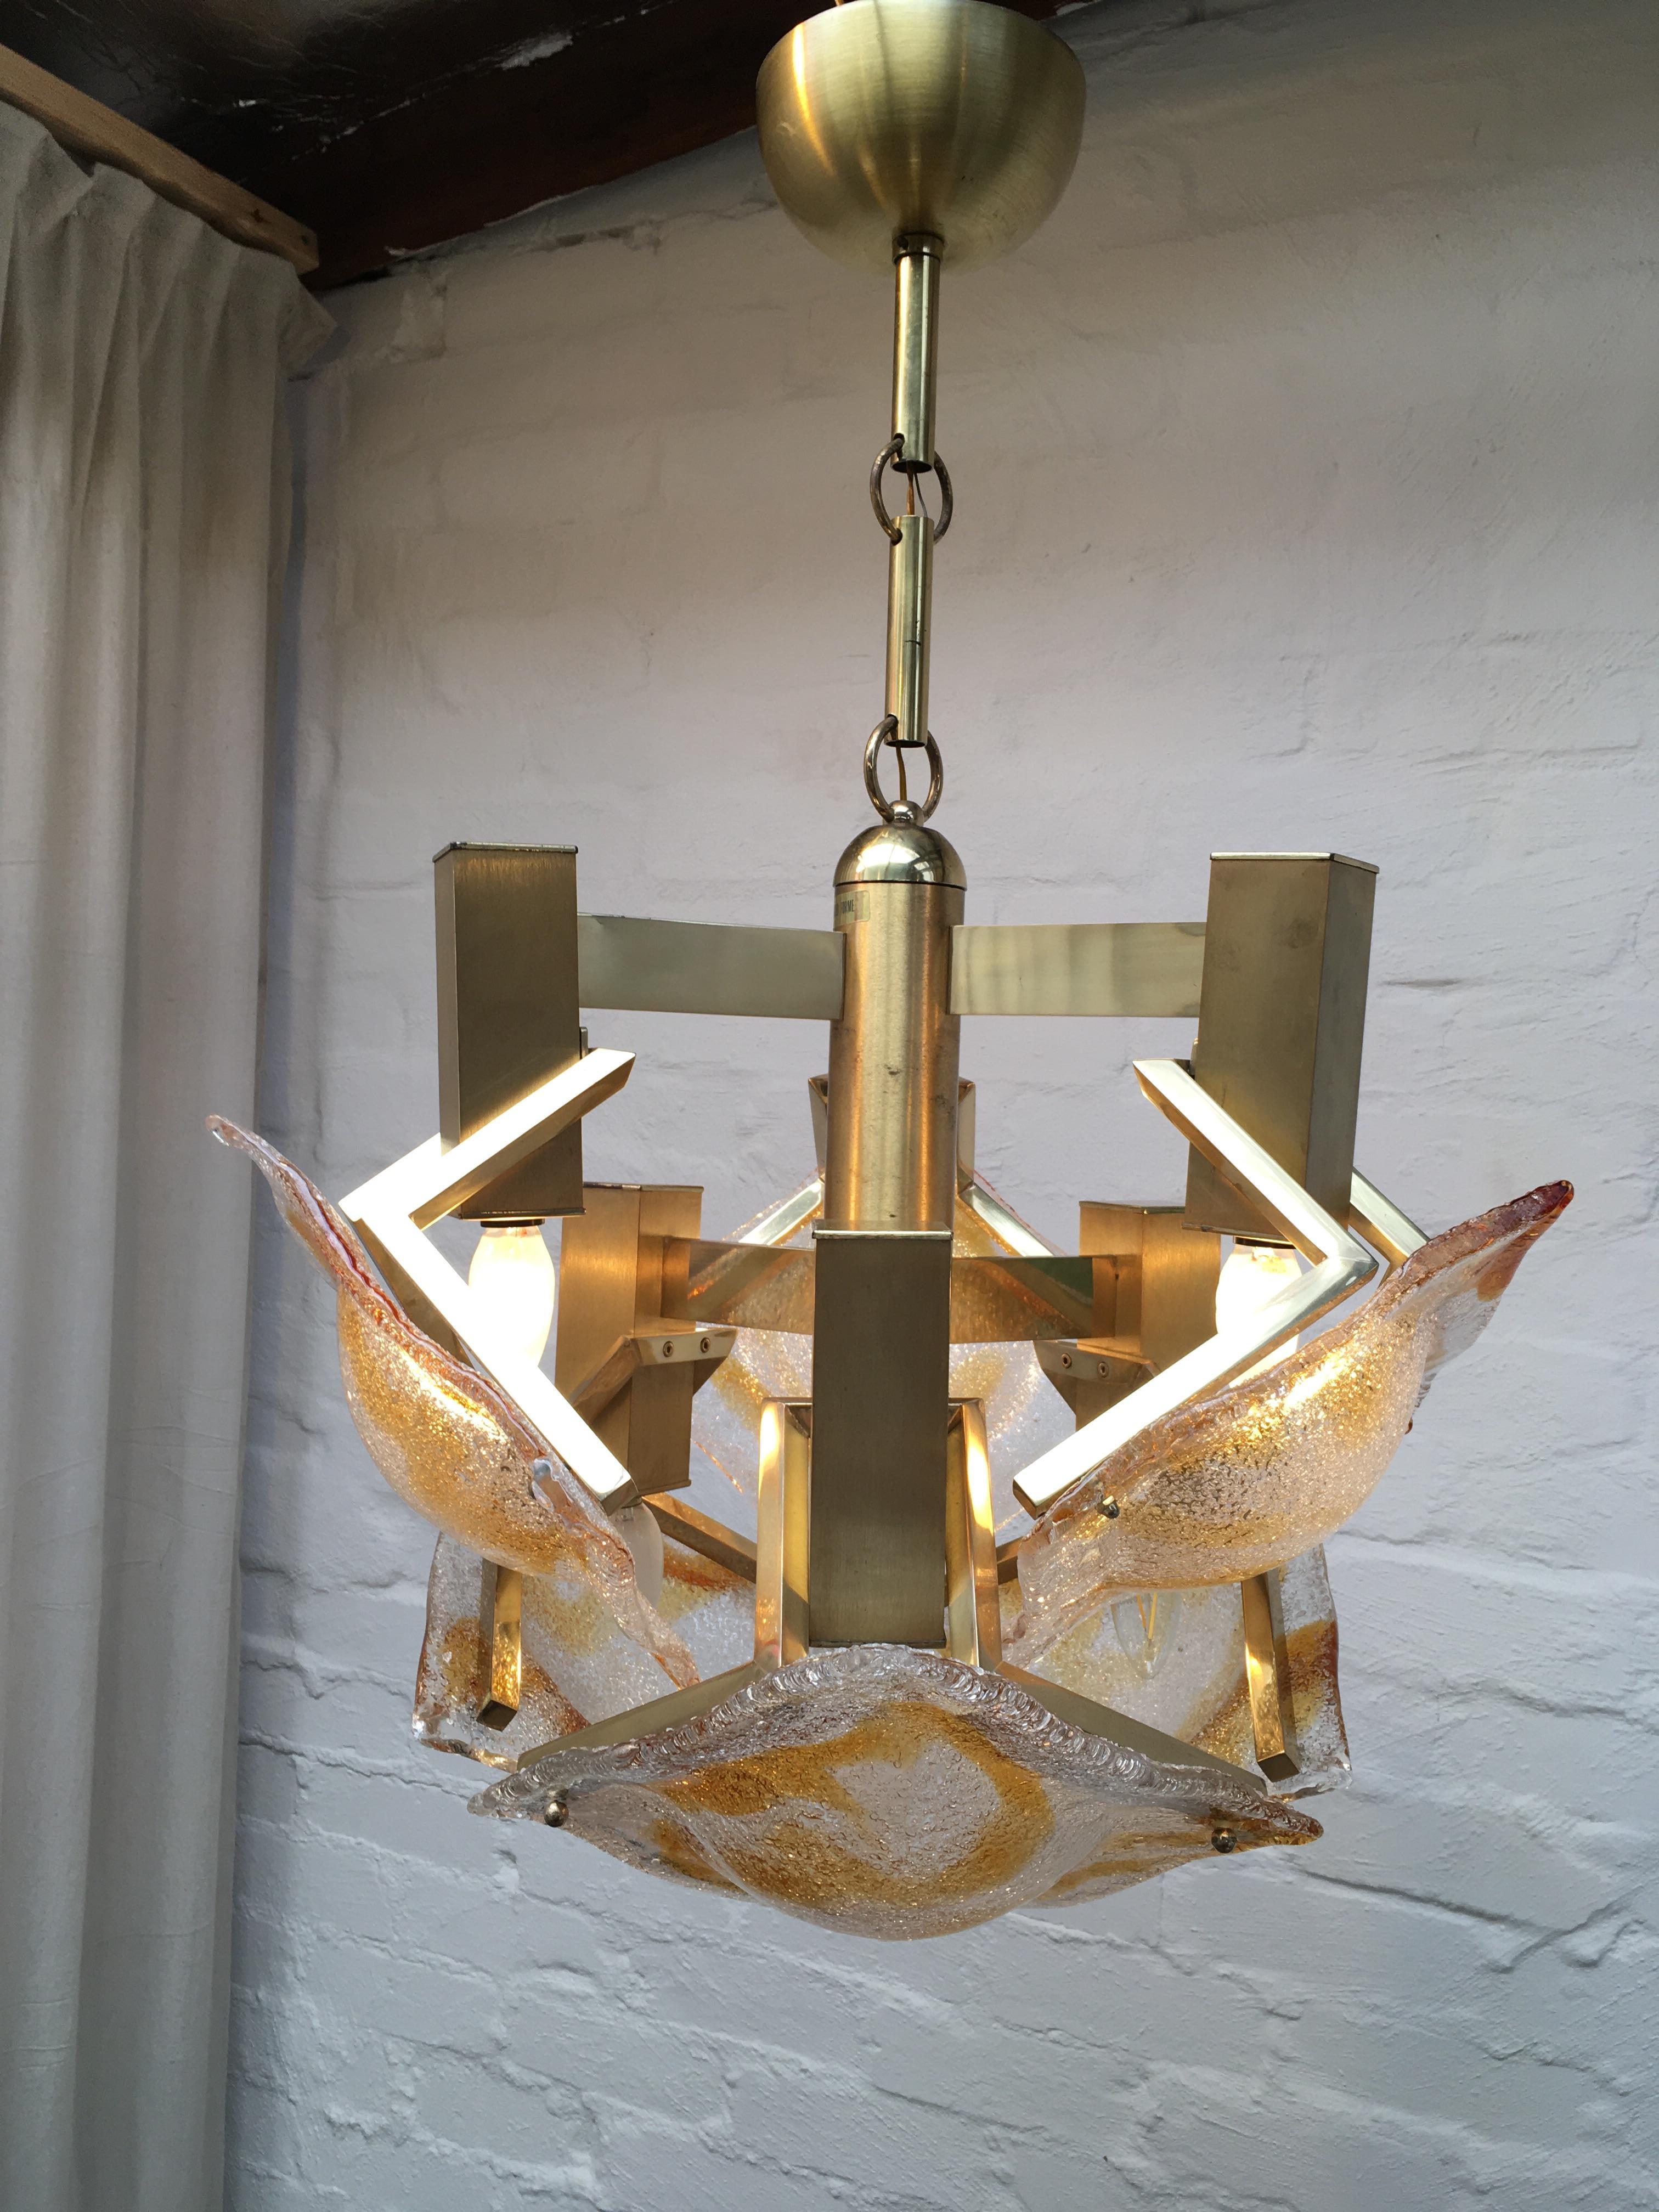 An impressive, angular, large 1970s chandelier in the Brutalist style. 

Produced by Nucleo Forme (trans. 'Core Forms'), an Italian lighting company we are sure to hear more about in the coming years. We think they may have been a manufacturer of